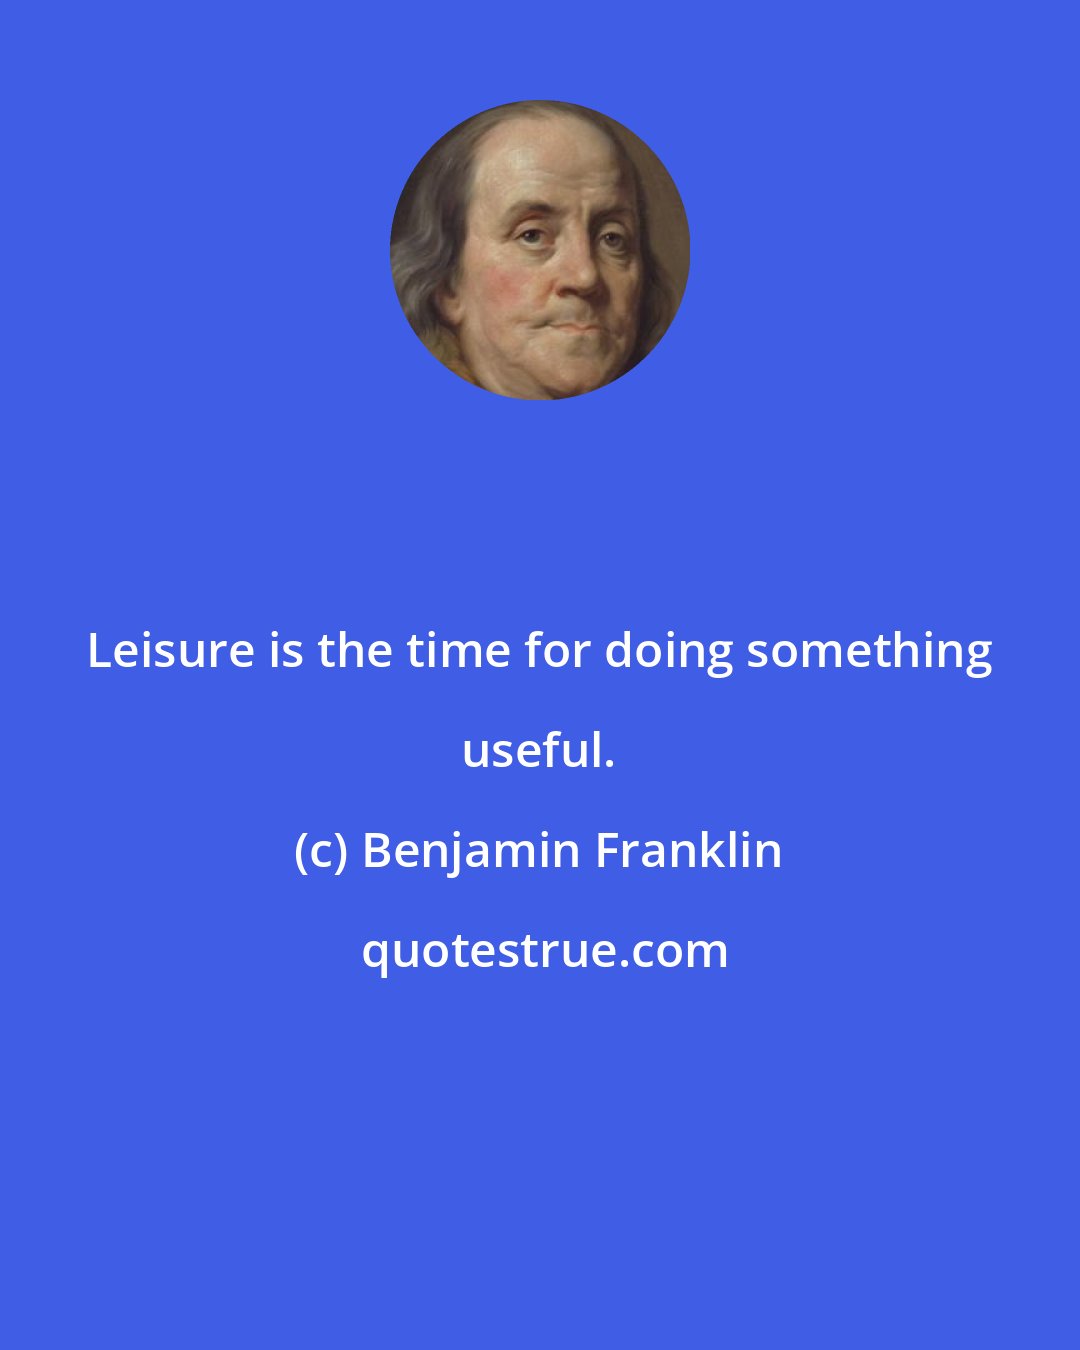 Benjamin Franklin: Leisure is the time for doing something useful.